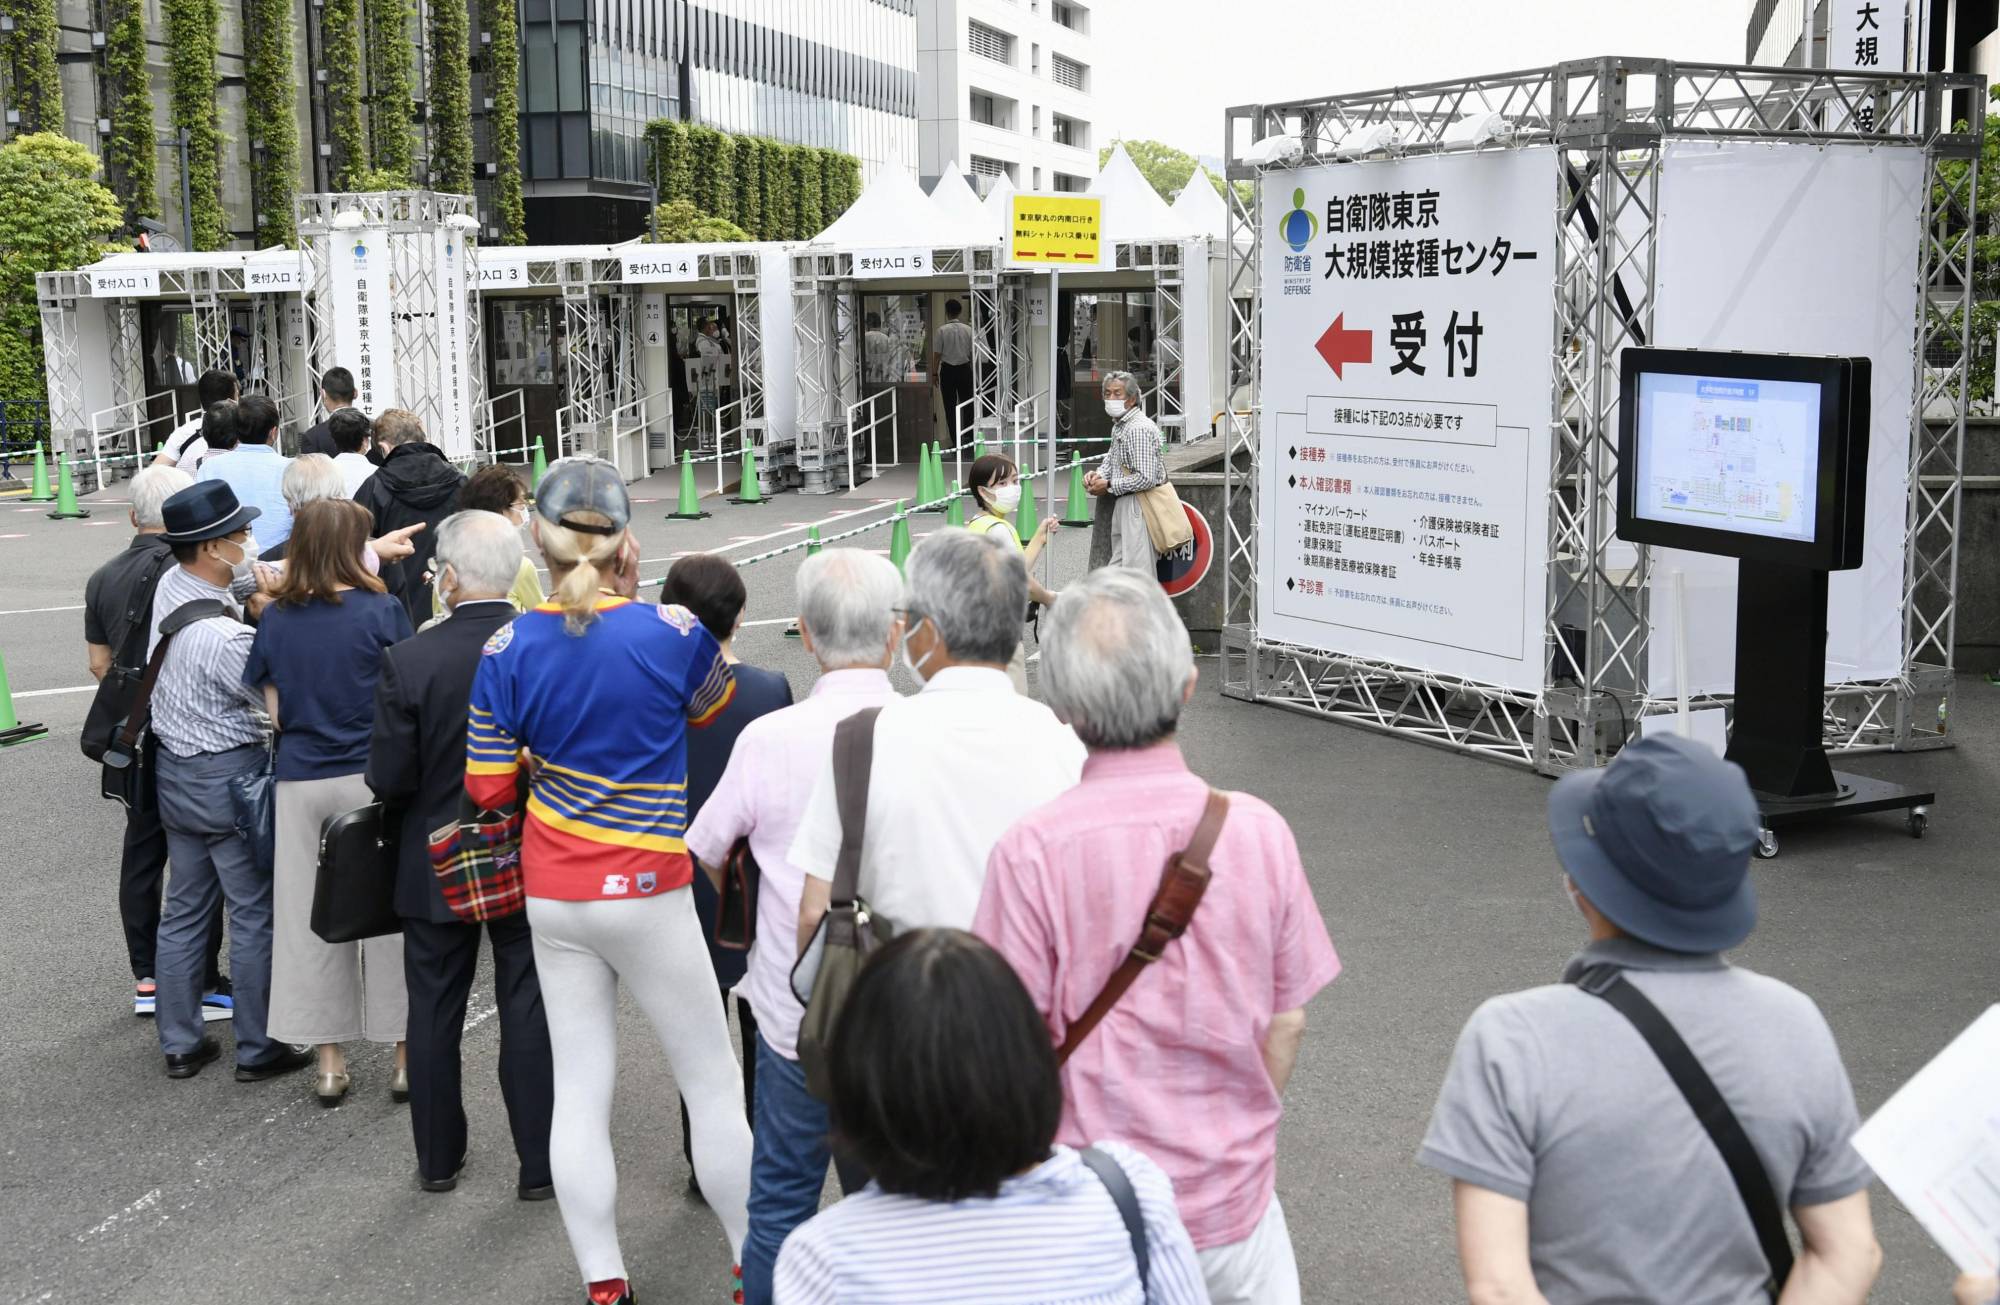 People line up in front of a mass-inoculation center in Tokyo's Chiyoda Ward on Wednesday to be vaccinated against COVID-19. | KYODO